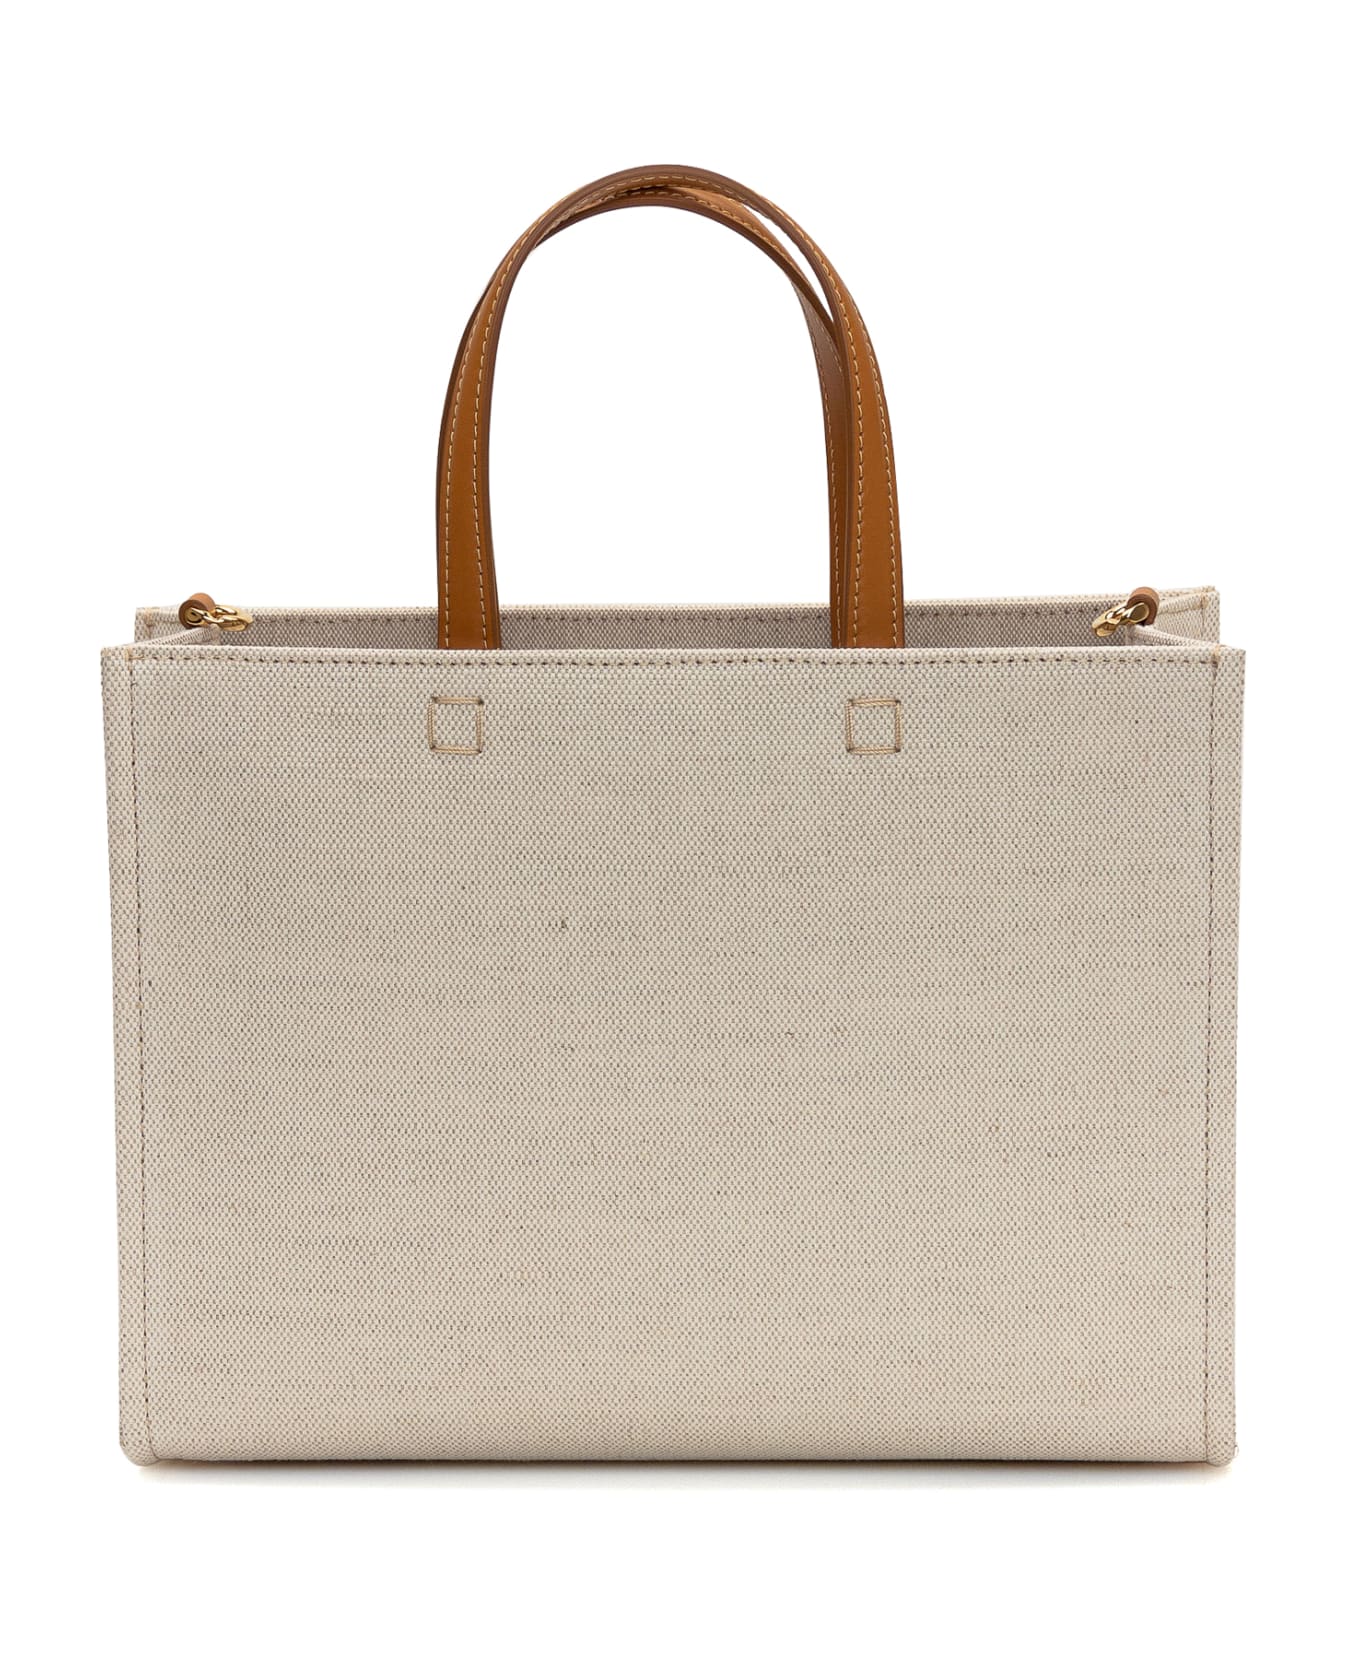 Givenchy G Tote Small Shopping Bag - NATURAL BEIGE